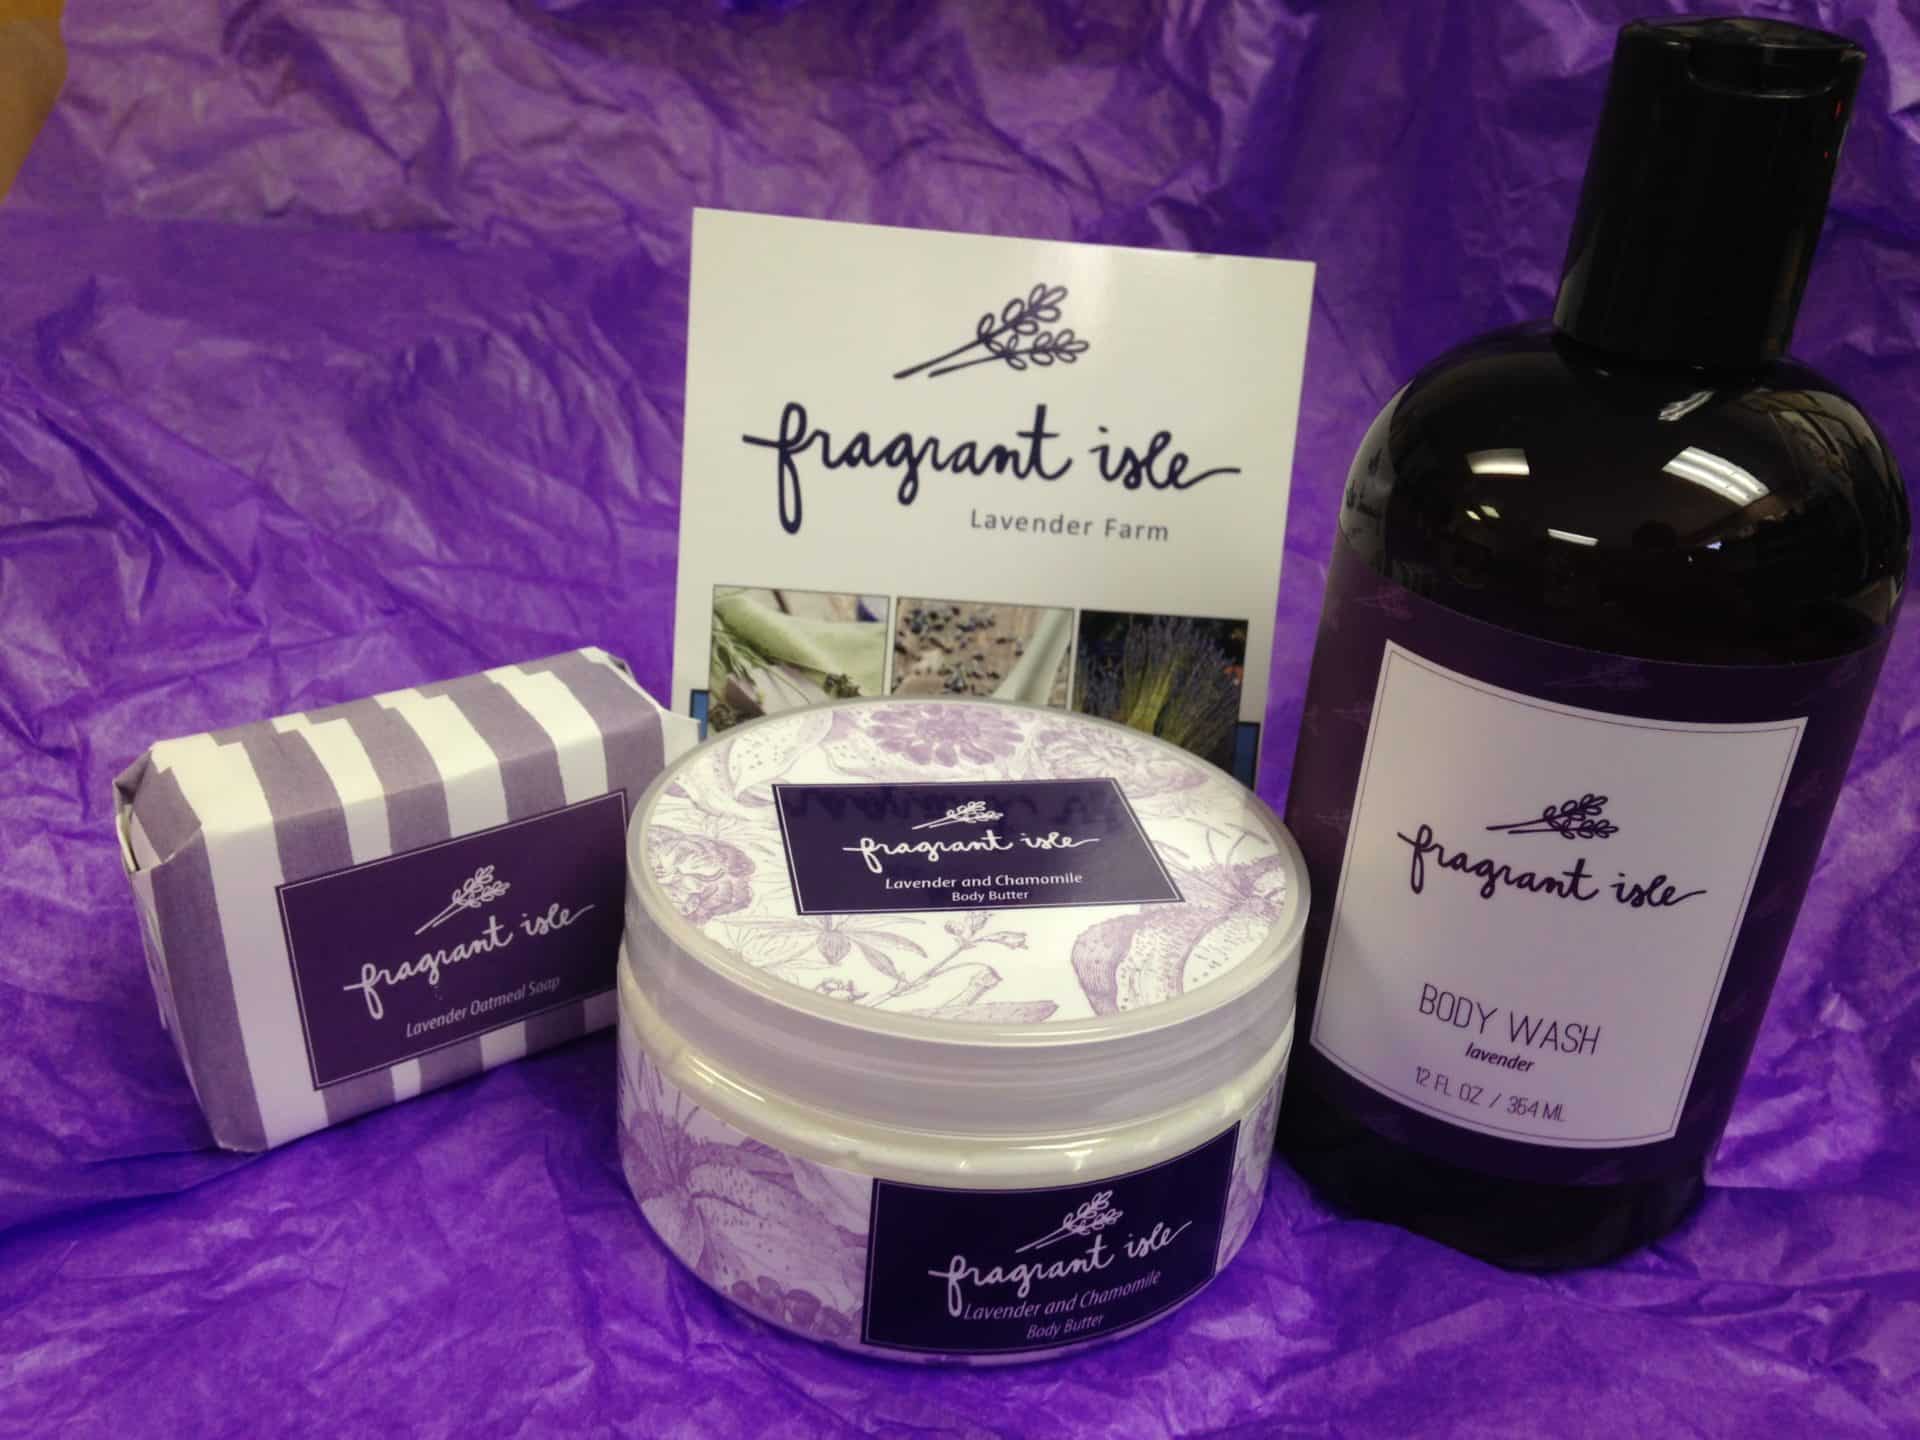 Fragrant Isle products